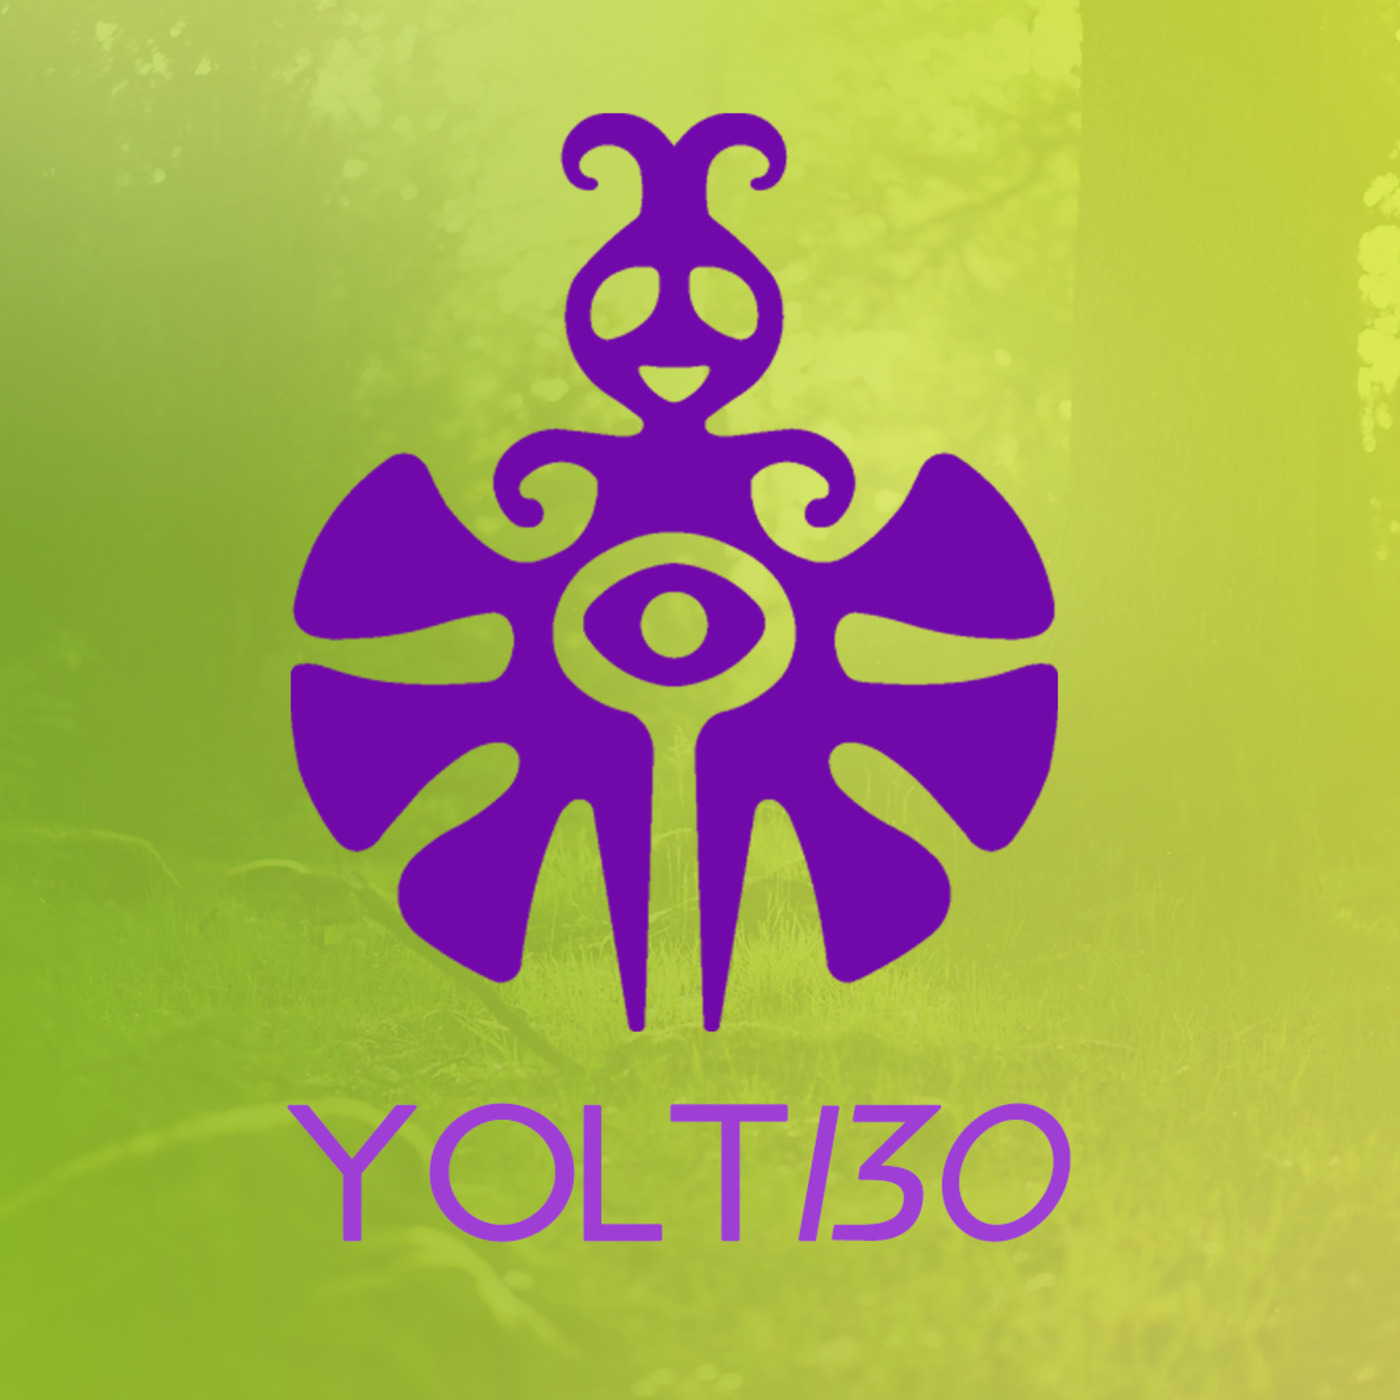 You Only Live Trance Episode 130 (#YOLT130) - Ness